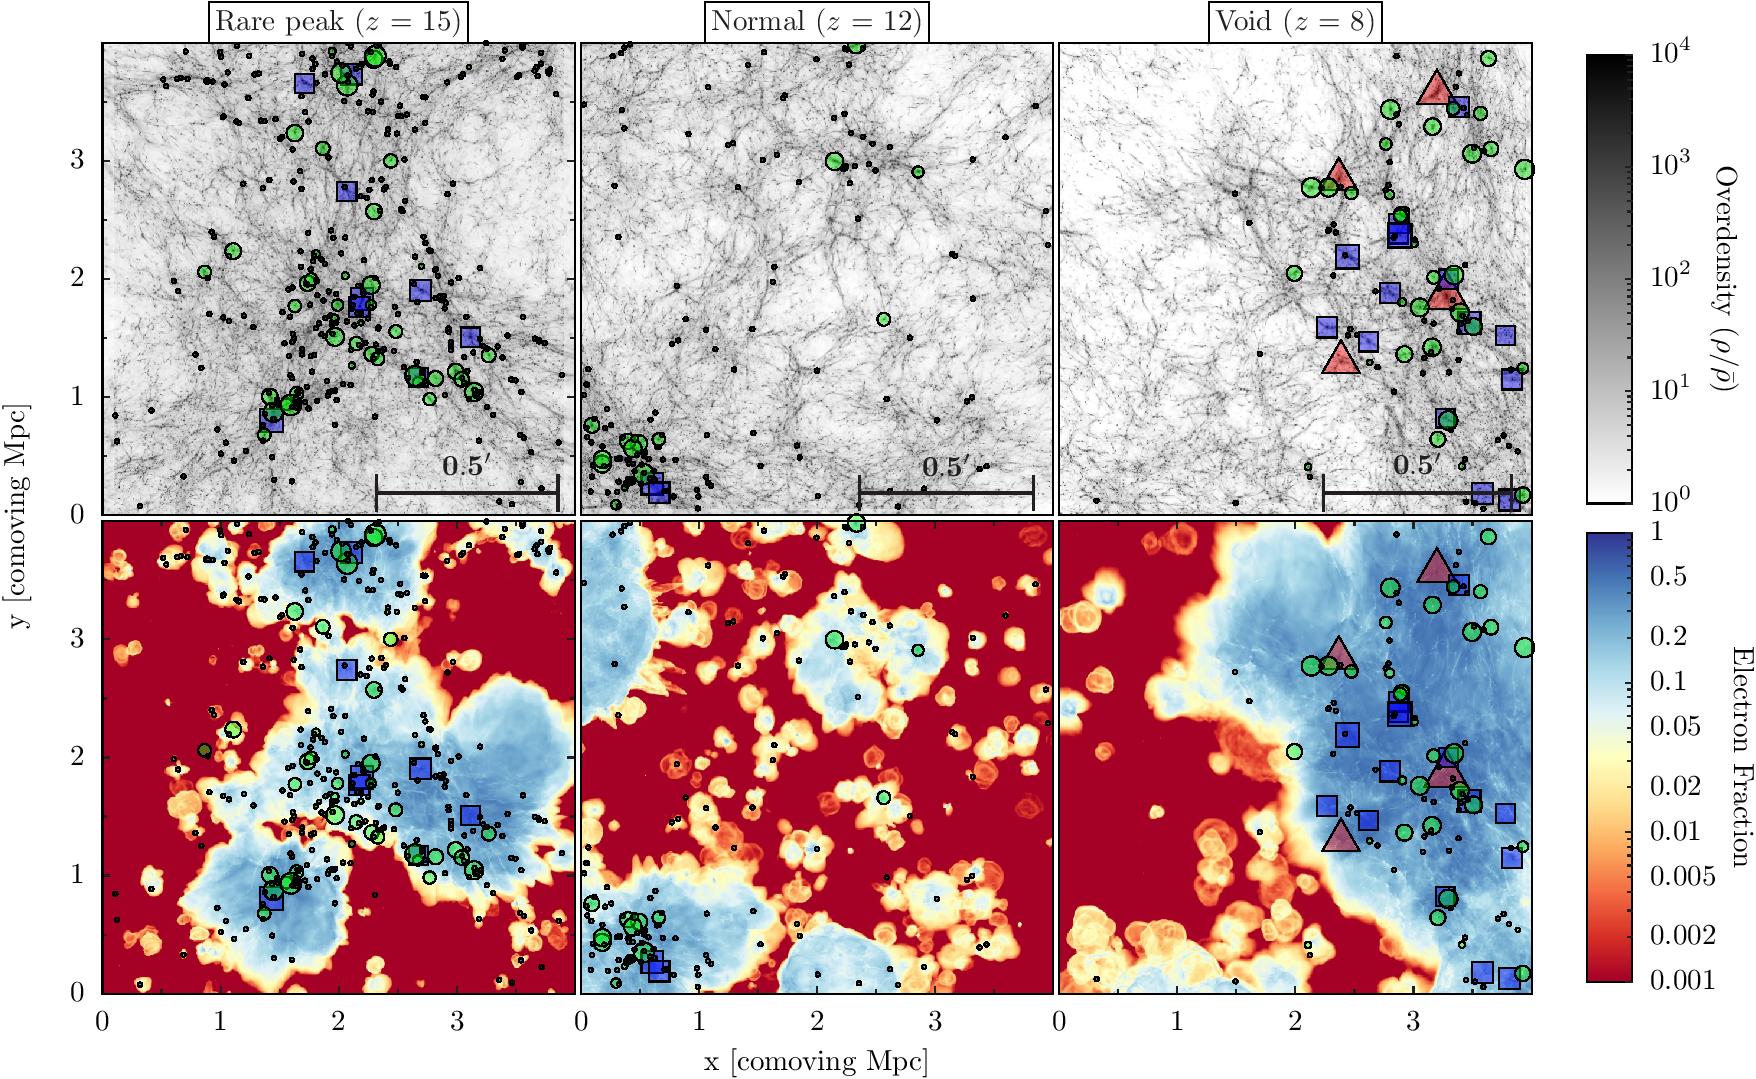 Matter overdensity (top row) and ionized fraction (bottom row) for the three regions simulated in the Renaissance Simulations. The red triangles represent the locations of galaxies that are detectable with the Hubble Space Telescope. Its successor, the James Webb Space Telescope, will detect many more distant galaxies, shown by the blue squares and green circles.  These first galaxies reionized the universe only 1 billion years after the Big Bang, shown in the image with ionized (blue) bubbles around the g